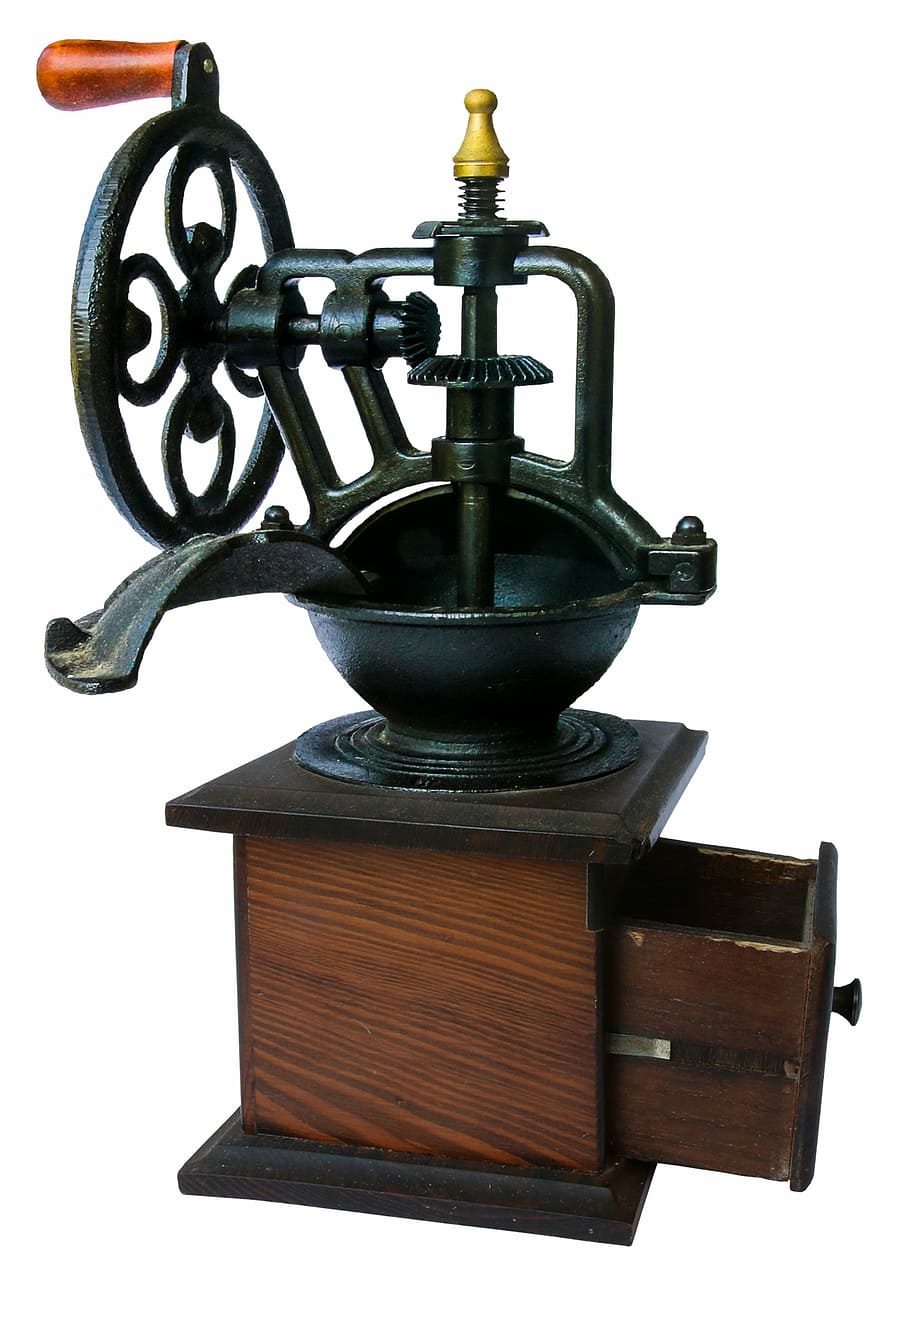 black steel frame, coffee, grinder, old, crank, mill, historically, white background, old-fashioned, stove